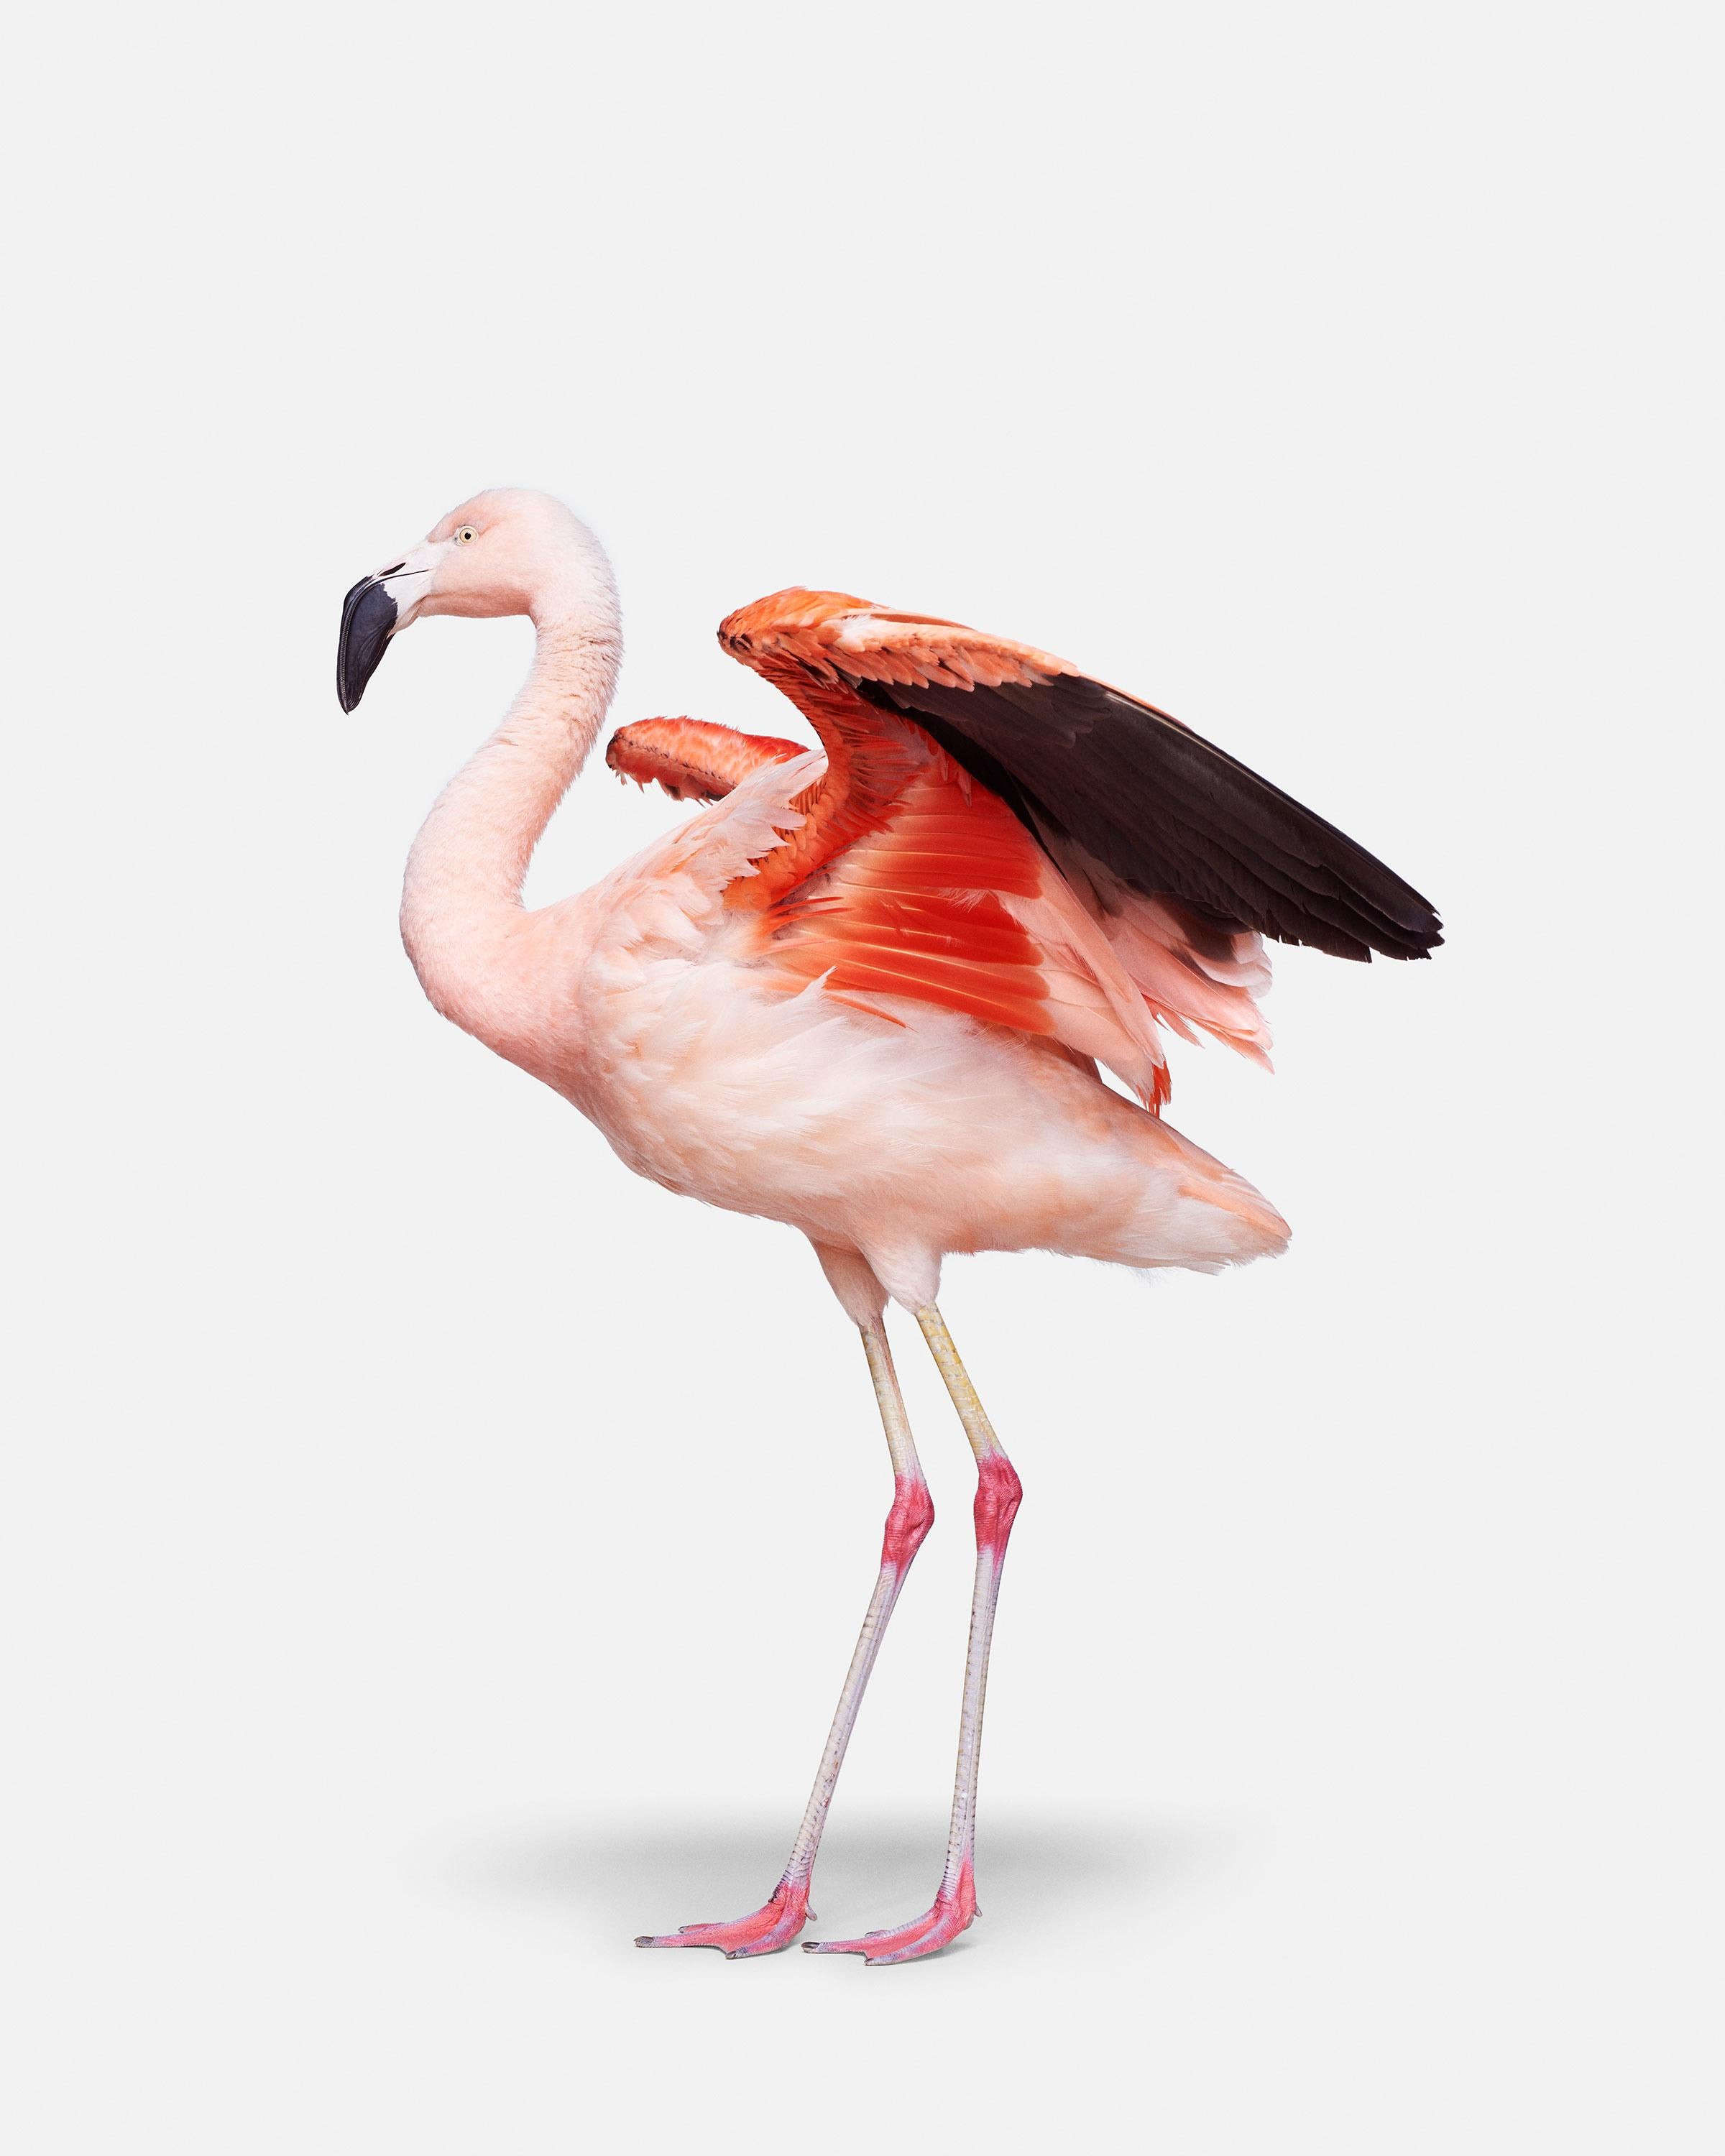 Flamingo No. 3
Available sizes:
37.5" x 30" Edition of 15
50" x 40"	 Edition of 10
60" x 48"	 Edition of 5

Alejandra:
Alejandra made us take our hats off, Mother Nature never fails to impress, and the color and shape of this South American beauty